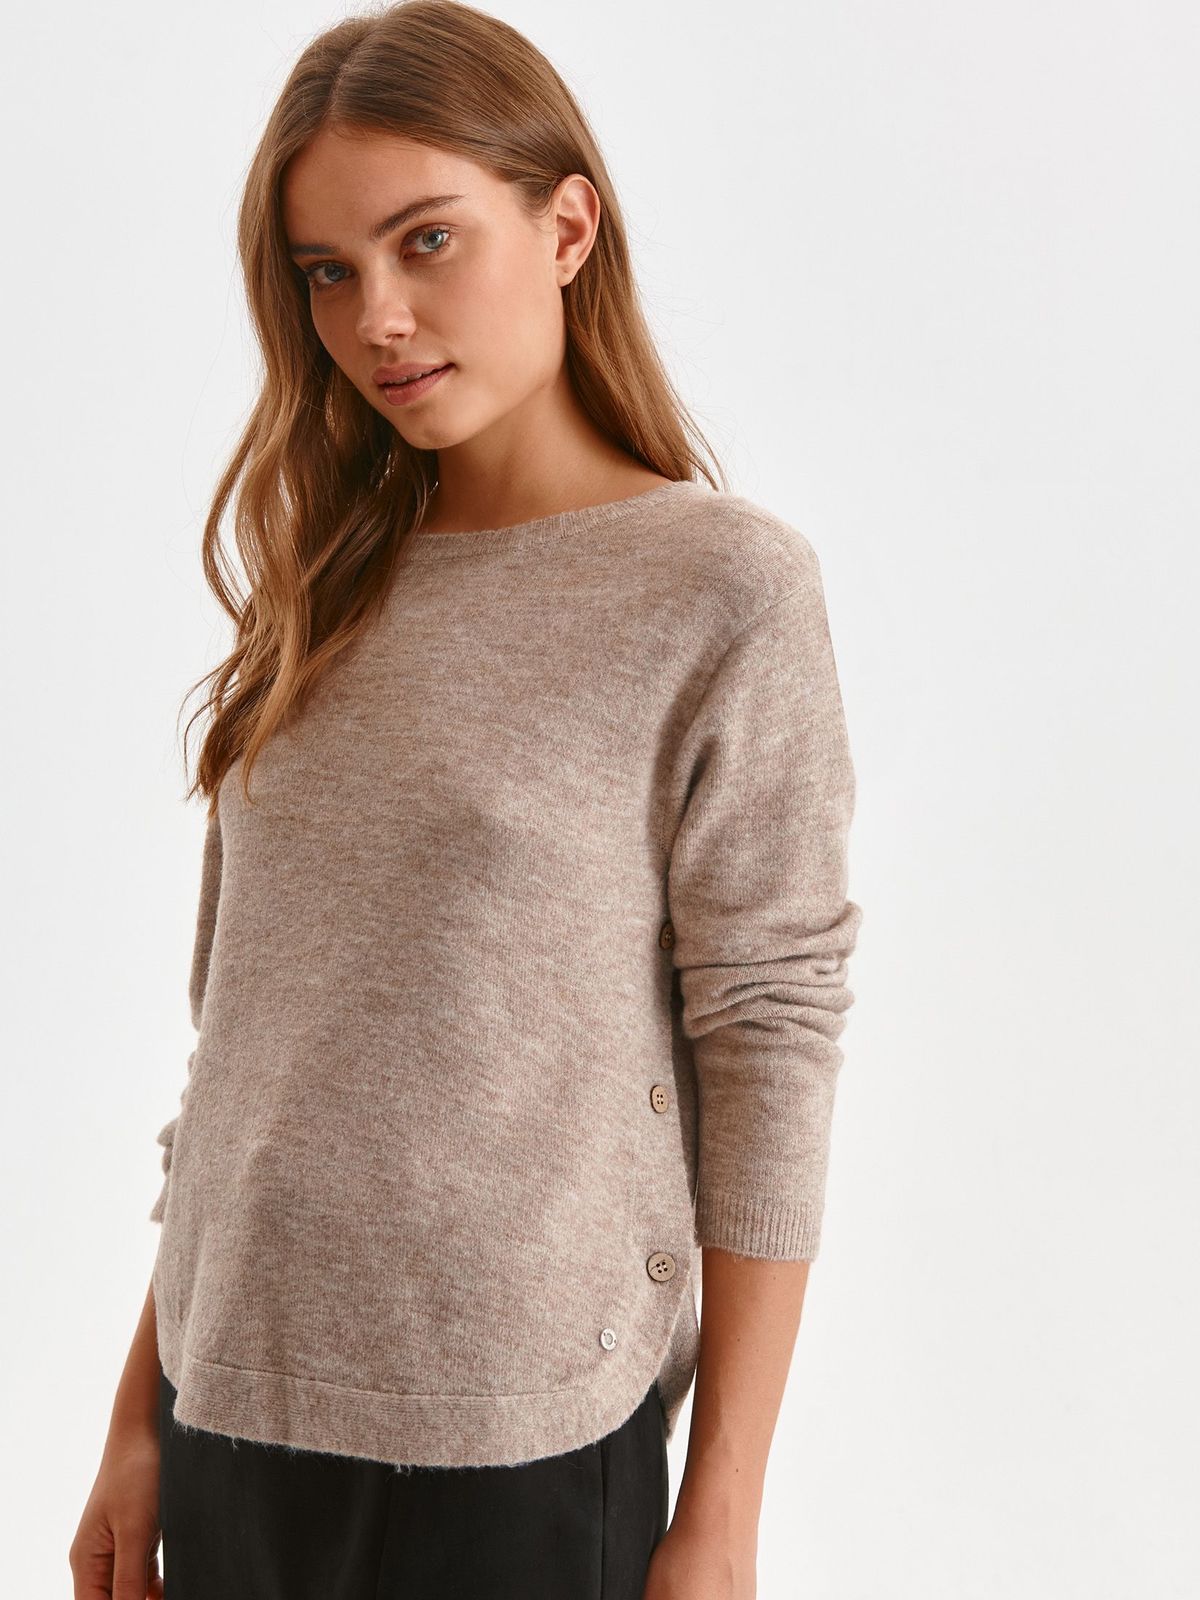 Cream sweater knitted loose fit neckline